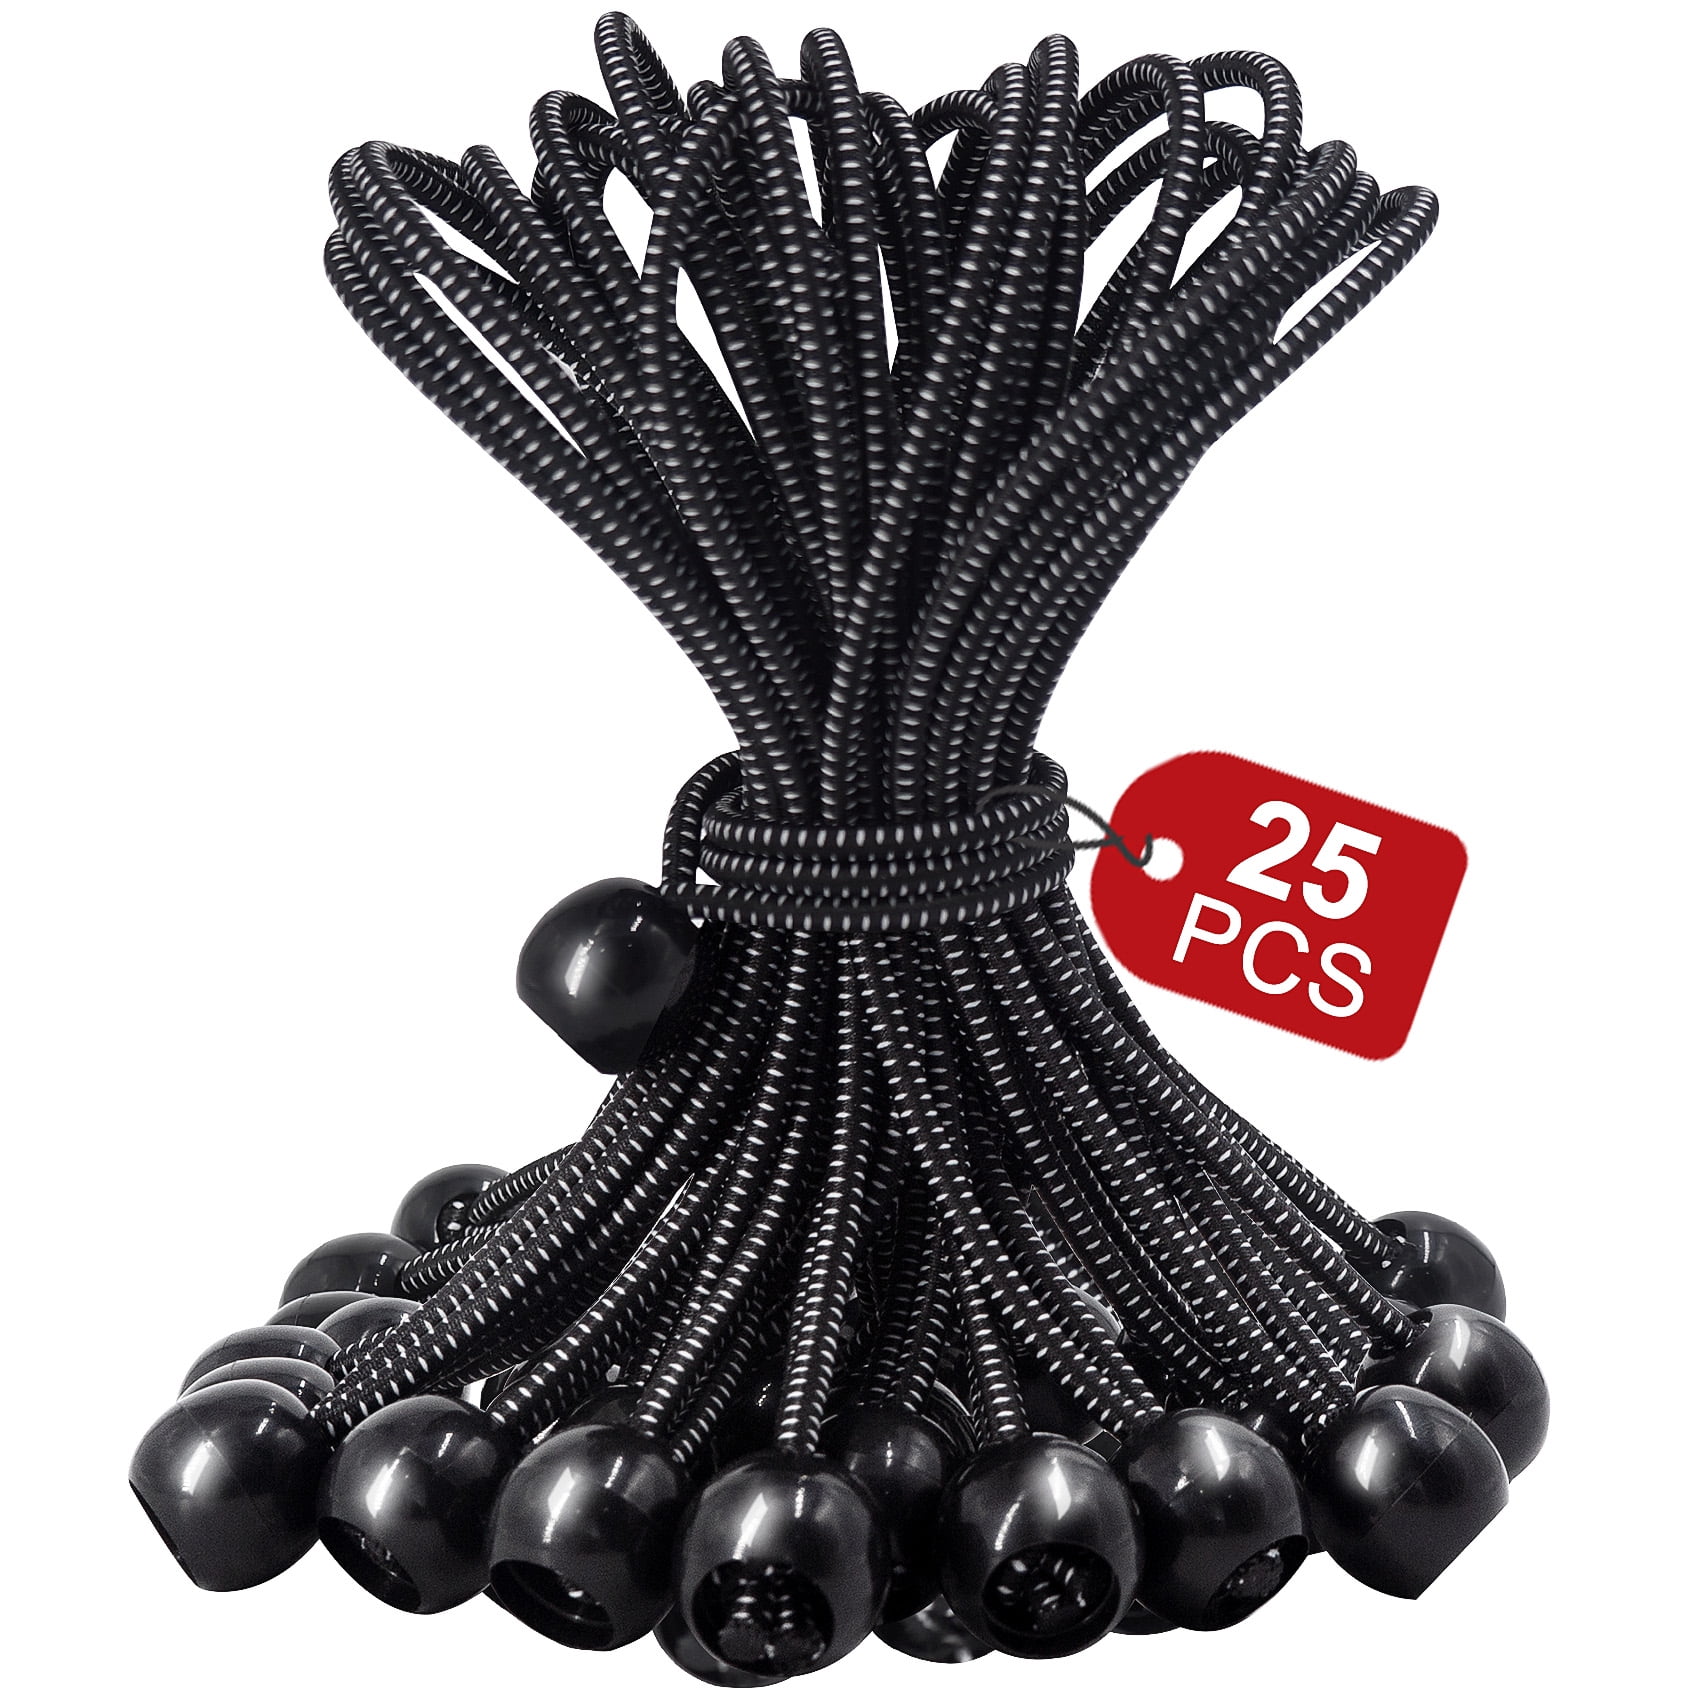 YOLETO 25 Pack Ball Bungee Cord,6 Inch Heavy Duty Outdoor Bungee